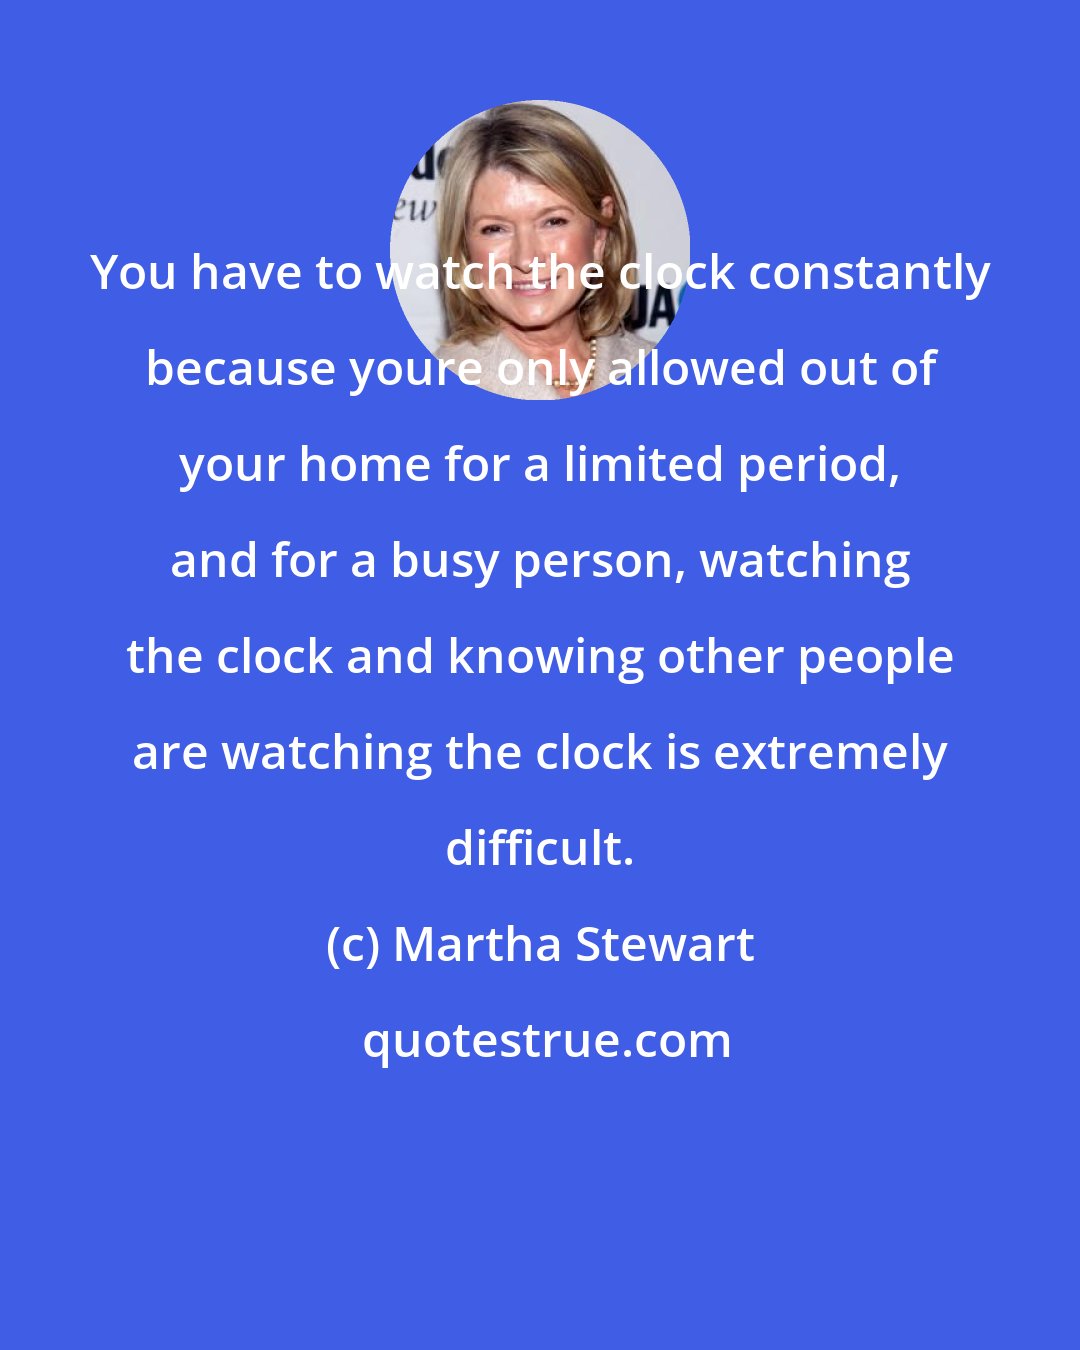 Martha Stewart: You have to watch the clock constantly because youre only allowed out of your home for a limited period, and for a busy person, watching the clock and knowing other people are watching the clock is extremely difficult.